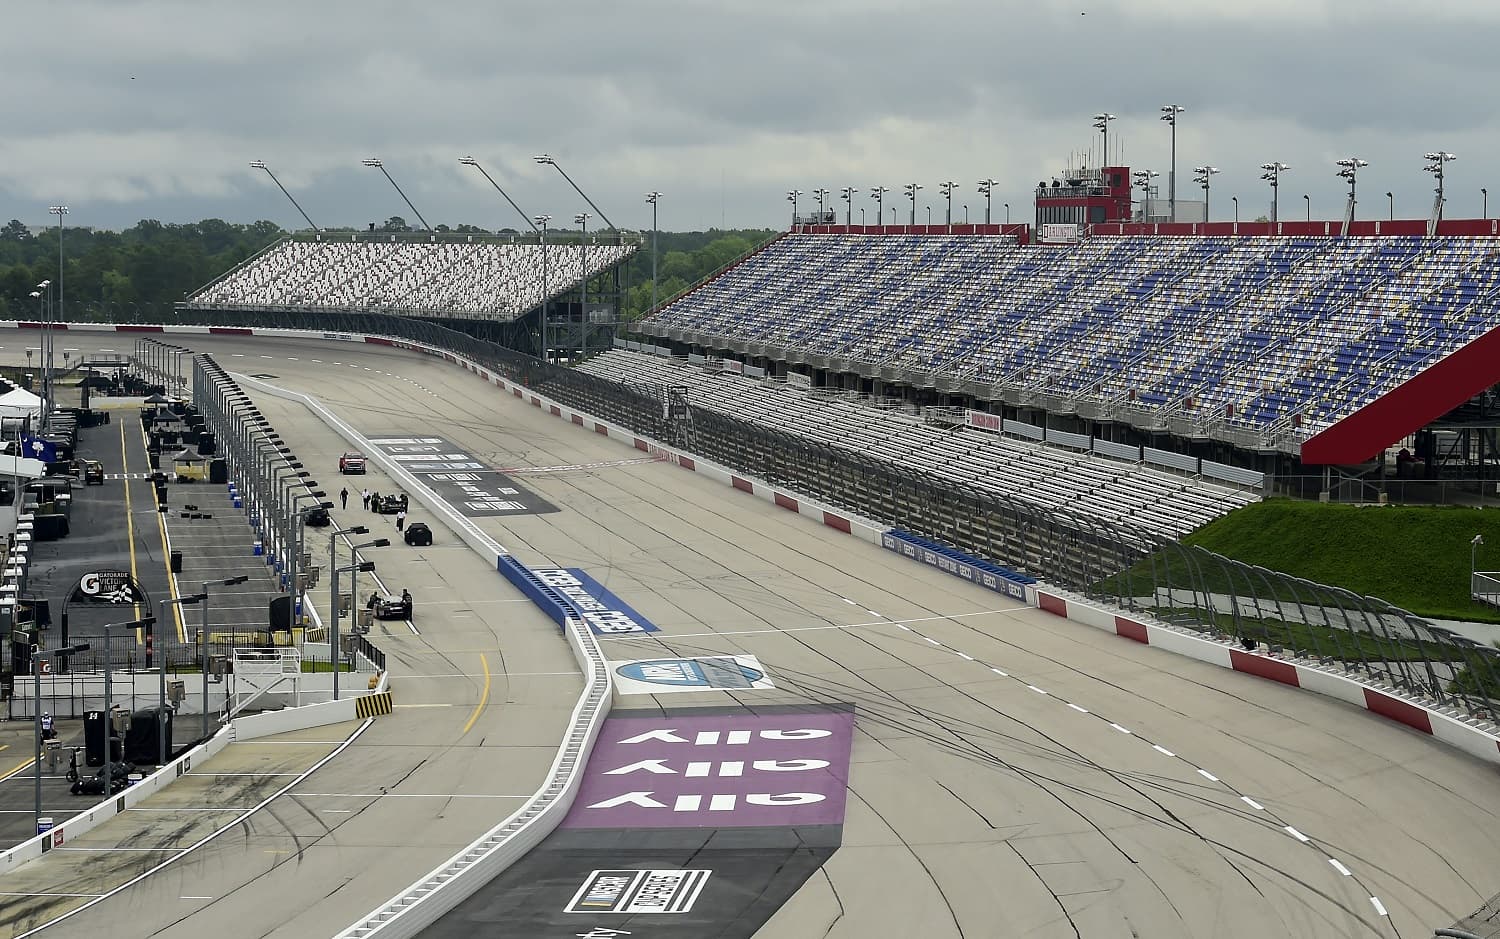 A general view of empty stands at Darlington during the 2020 pandemic. NASCAR tracks will be empty this weekend for a different reason.